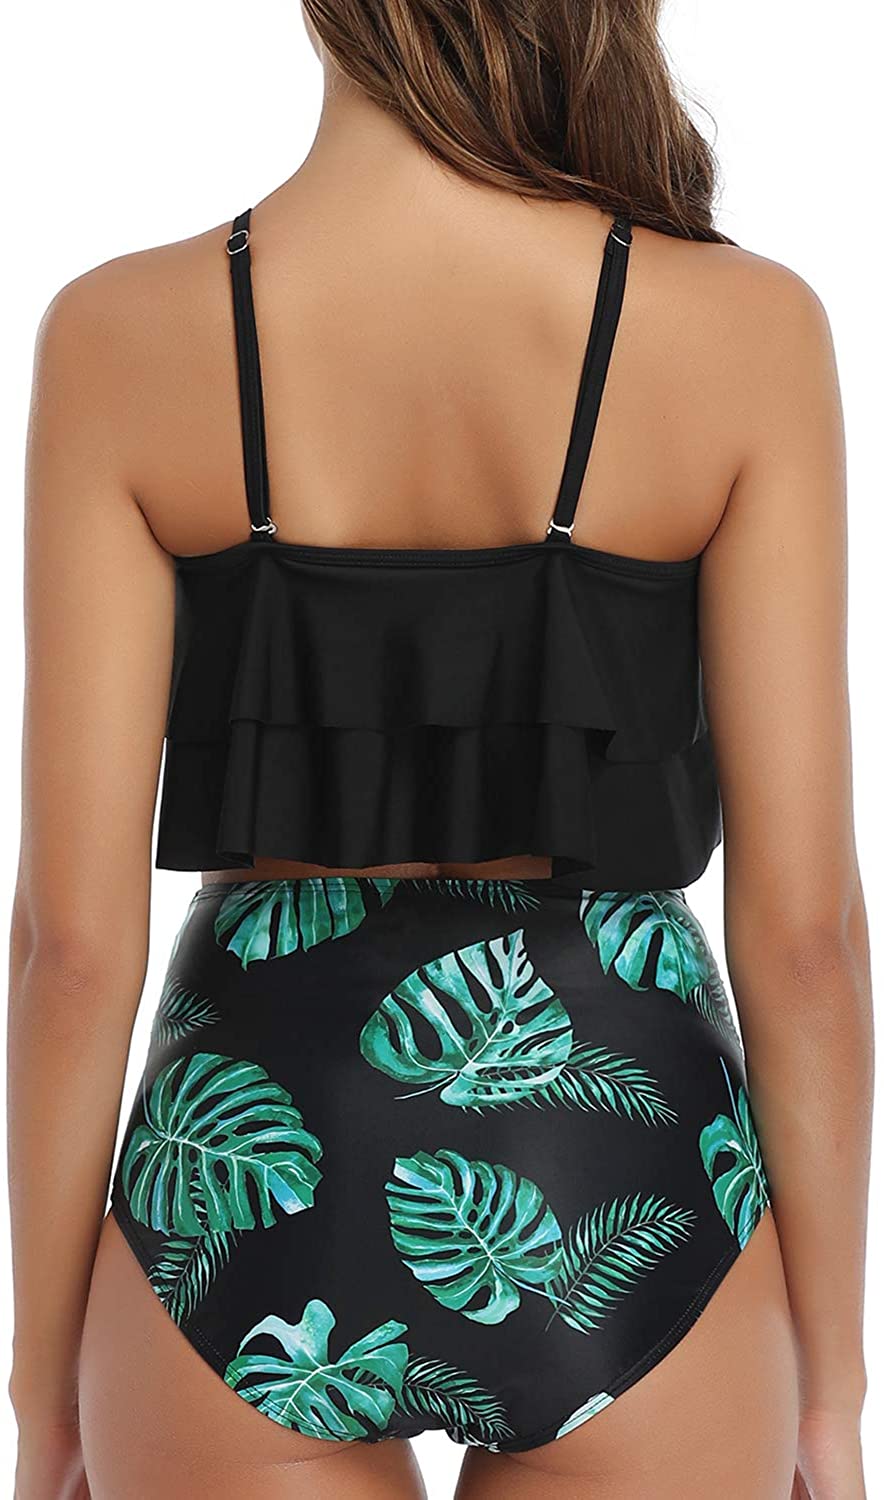 Tempt Me Women Two Piece Ruffle Swimsuits High Waisted, Black Leaf ...